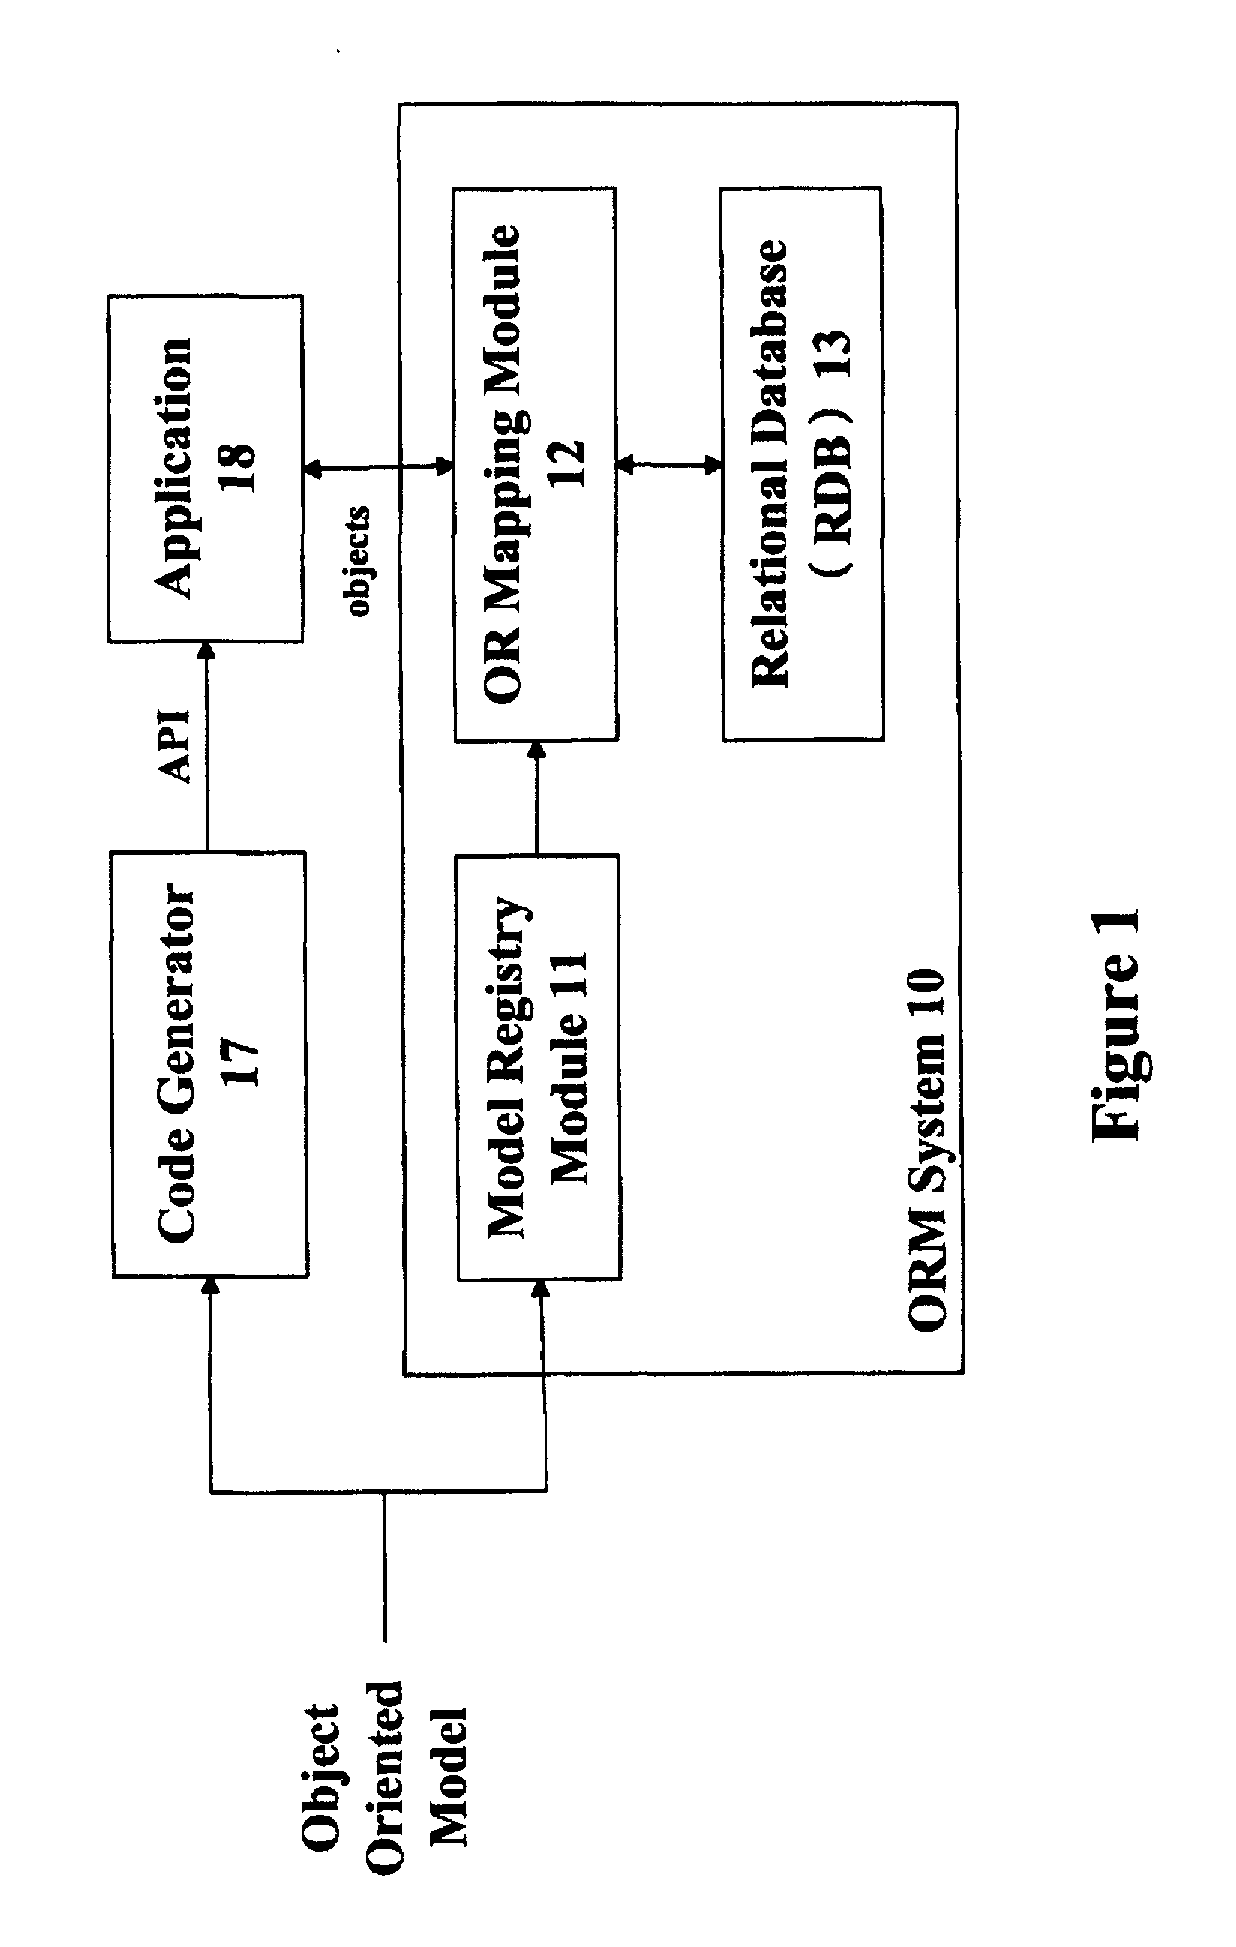 System and Method to Support Runtime Model Extension in an Object Relational Mapping (ORM) System